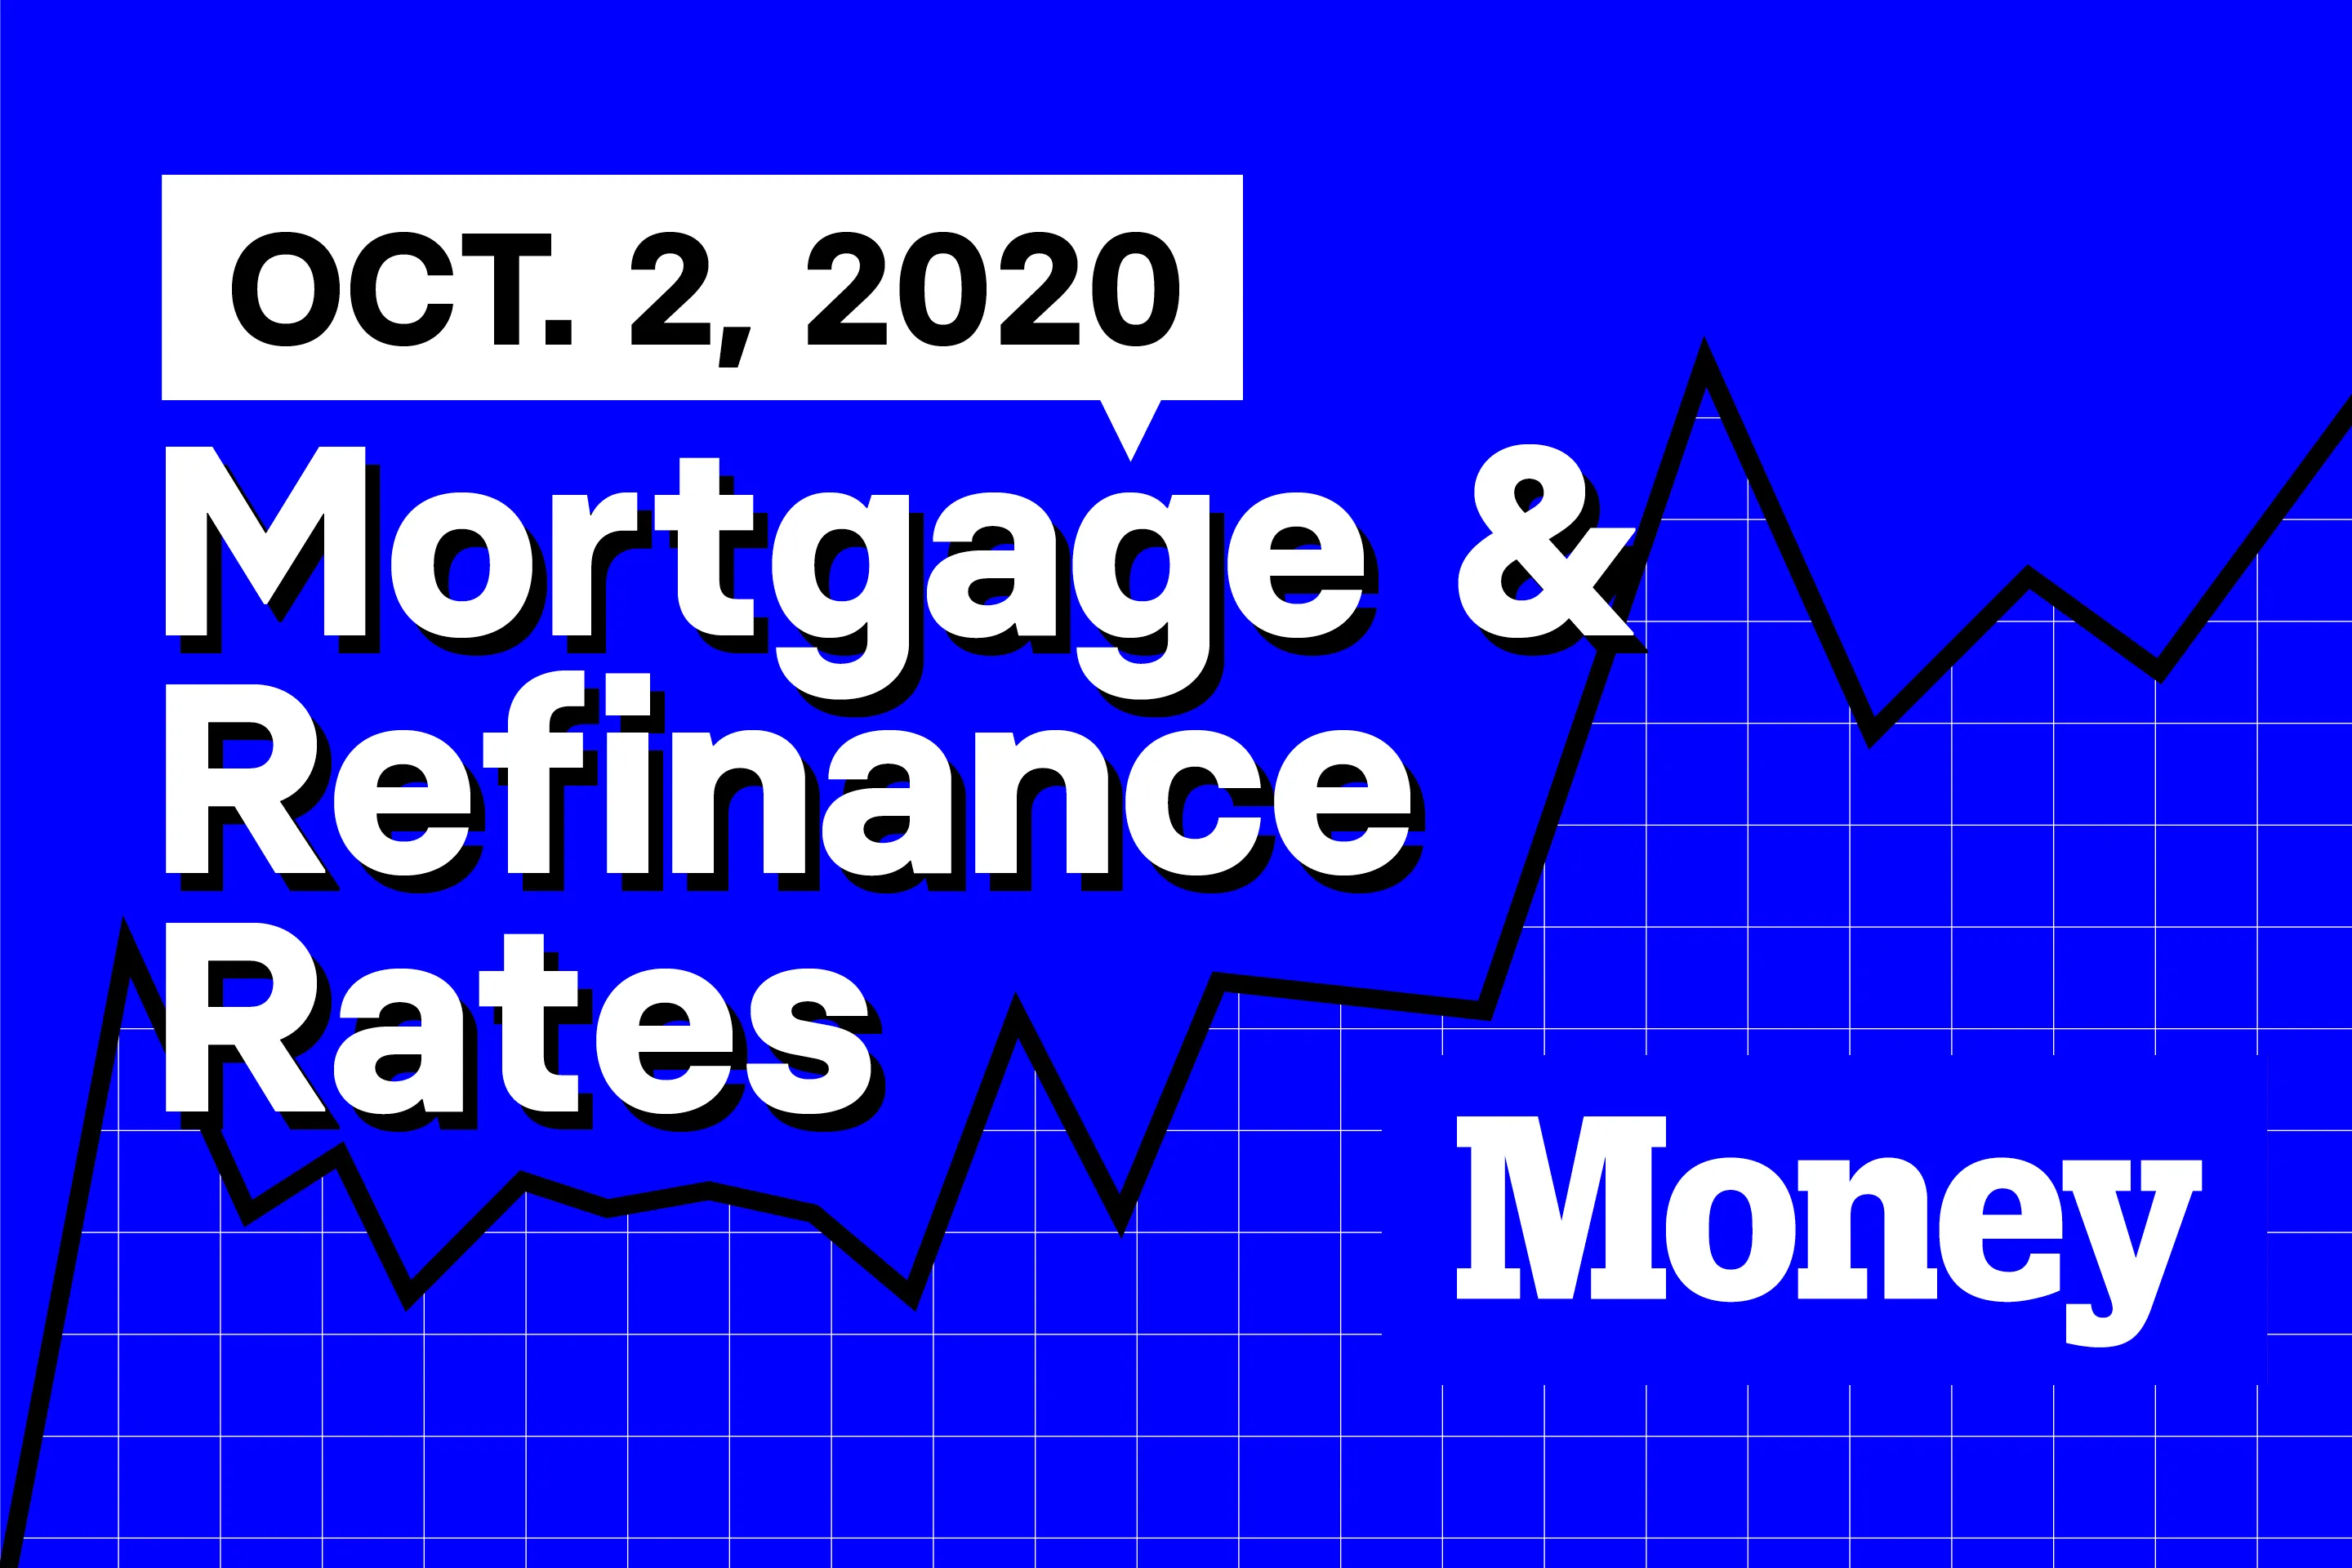 Today's Best Mortgage & Refinance Rates for October 2, 2020 Money